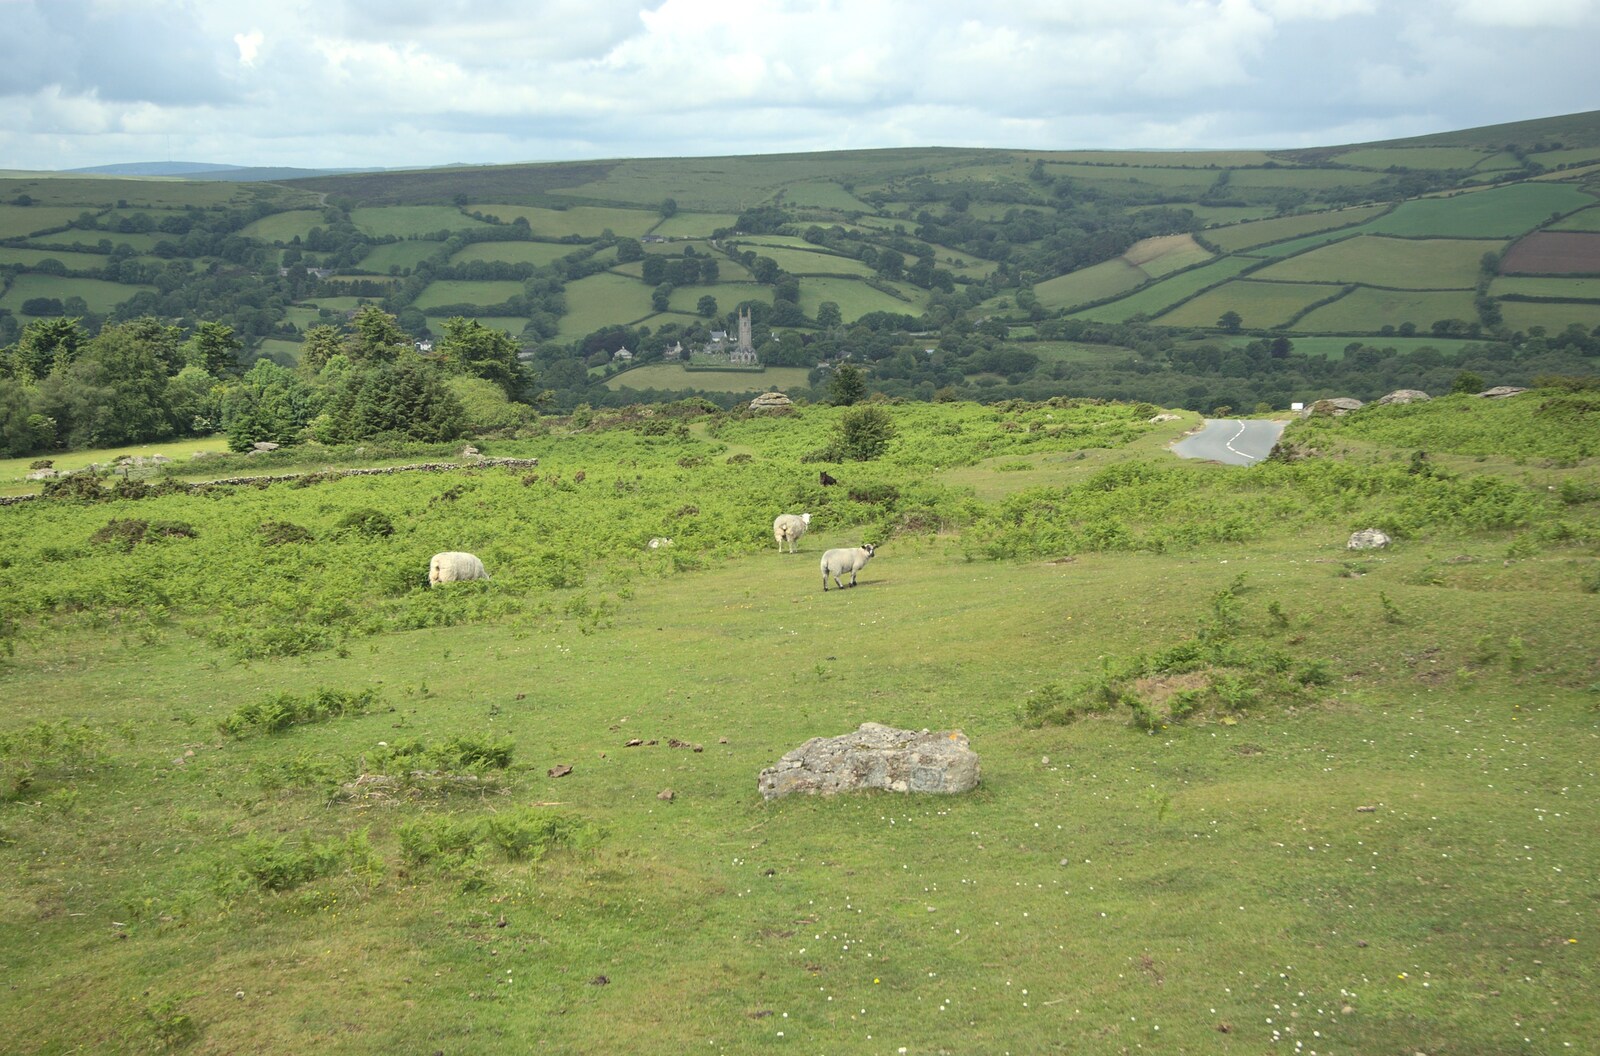 Looking back down at Widdecombe from A Camper Van Odyssey: Charmouth, Plymouth, Dartmoor and Bath - 20th June 2011